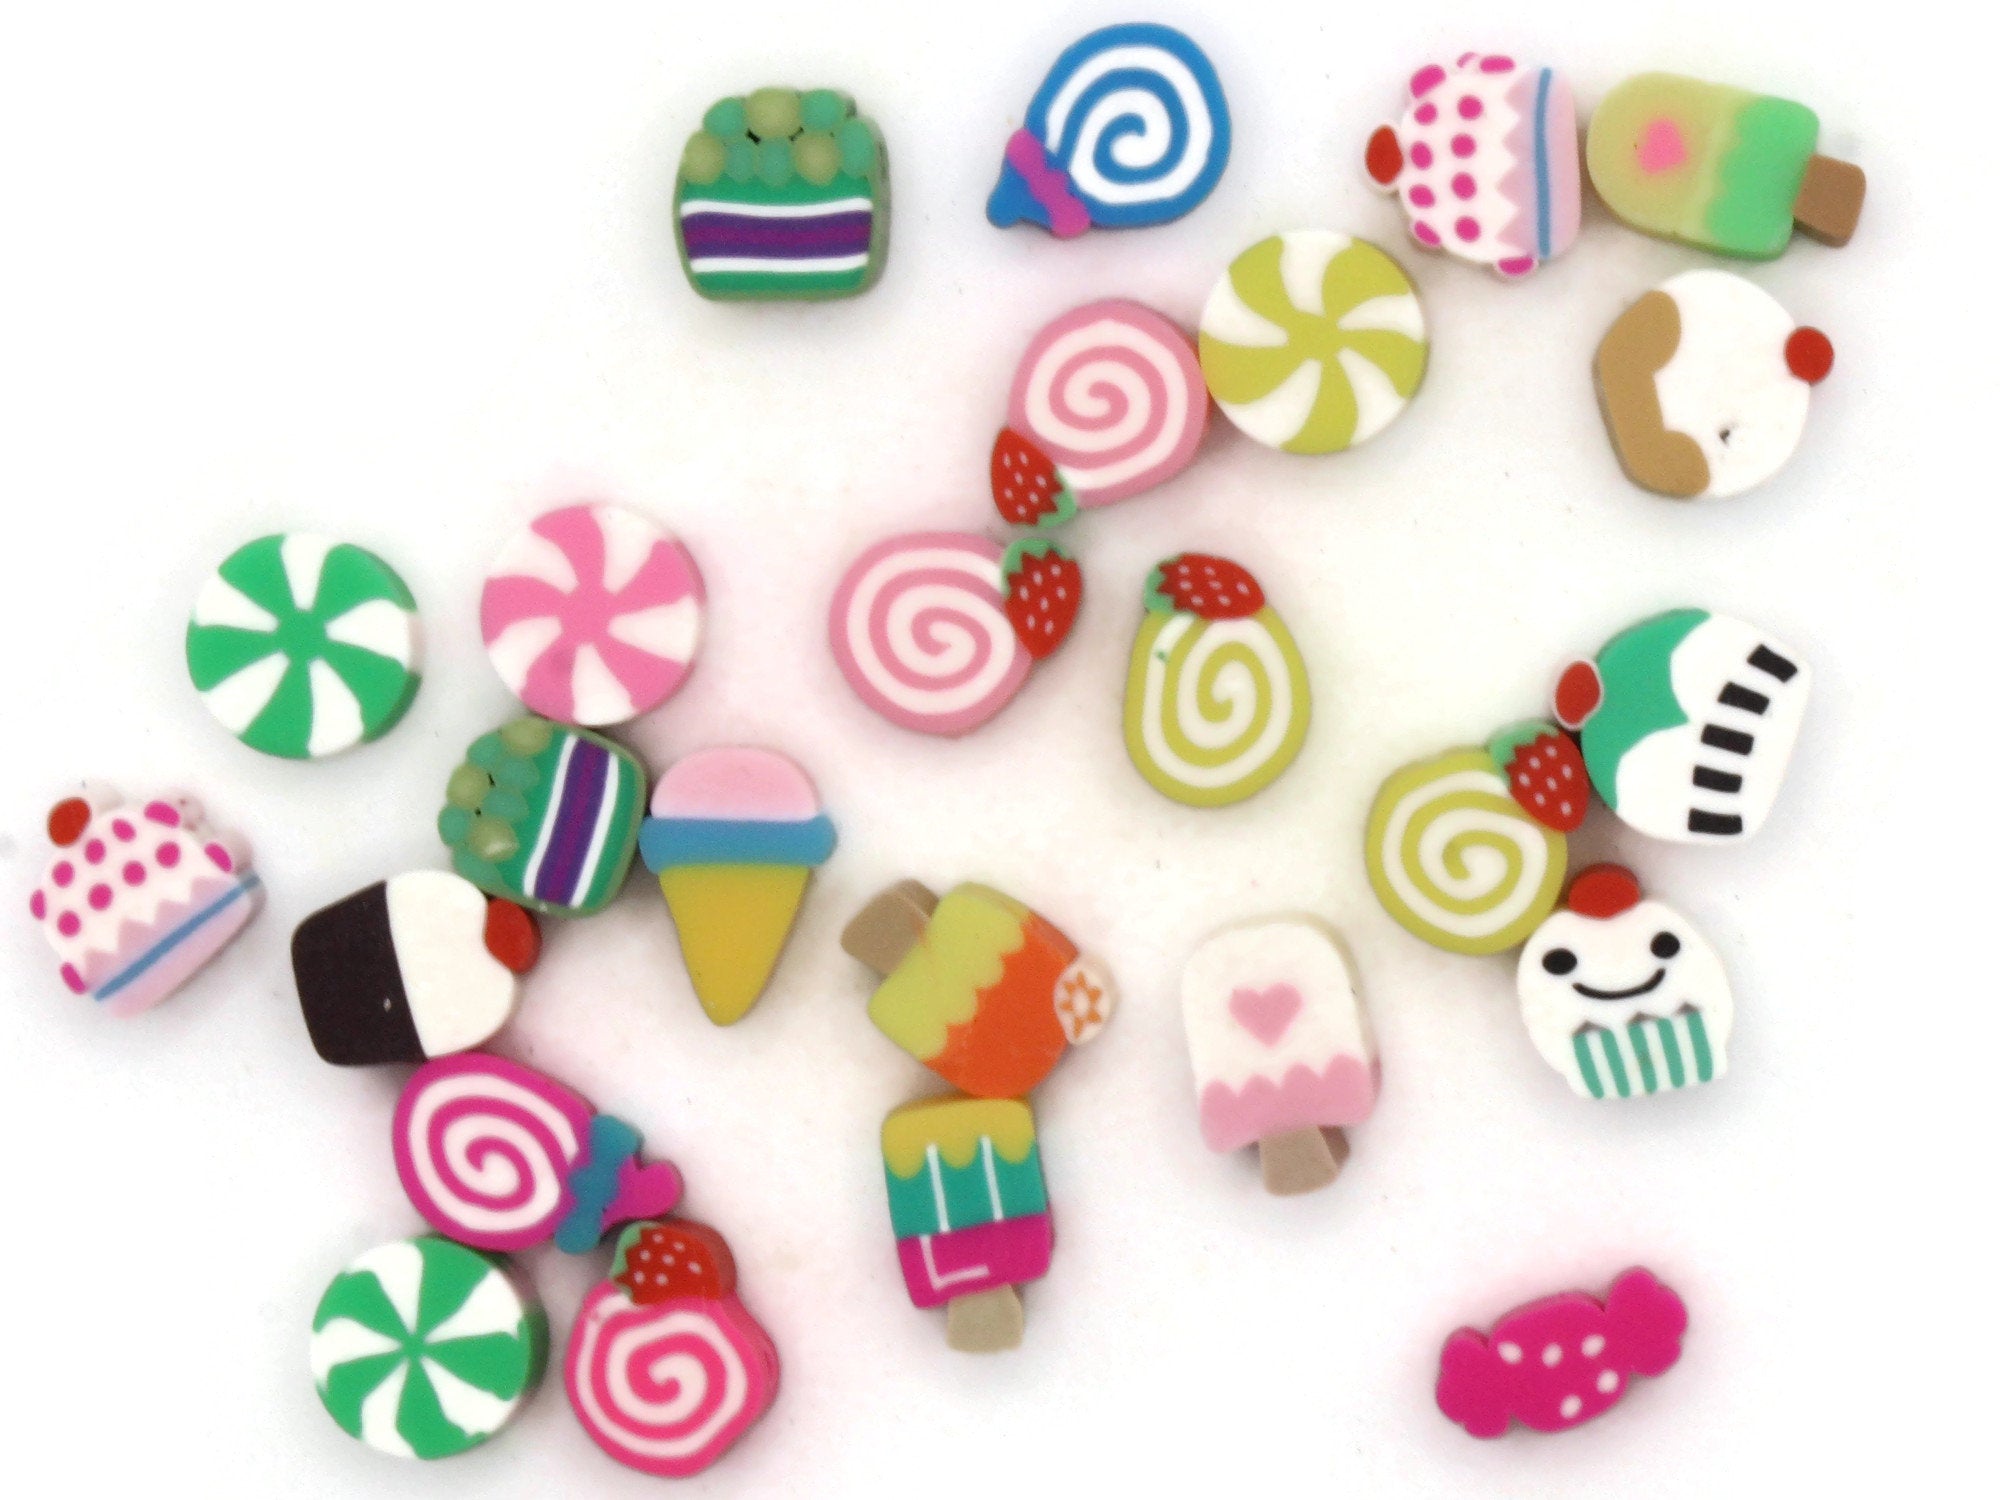 25 10mm Cupcake, Popsicle, Ice Cream and Candy Beads - Mixed Sweet Treat Clay Beads by Smileyboy Beads | Michaels